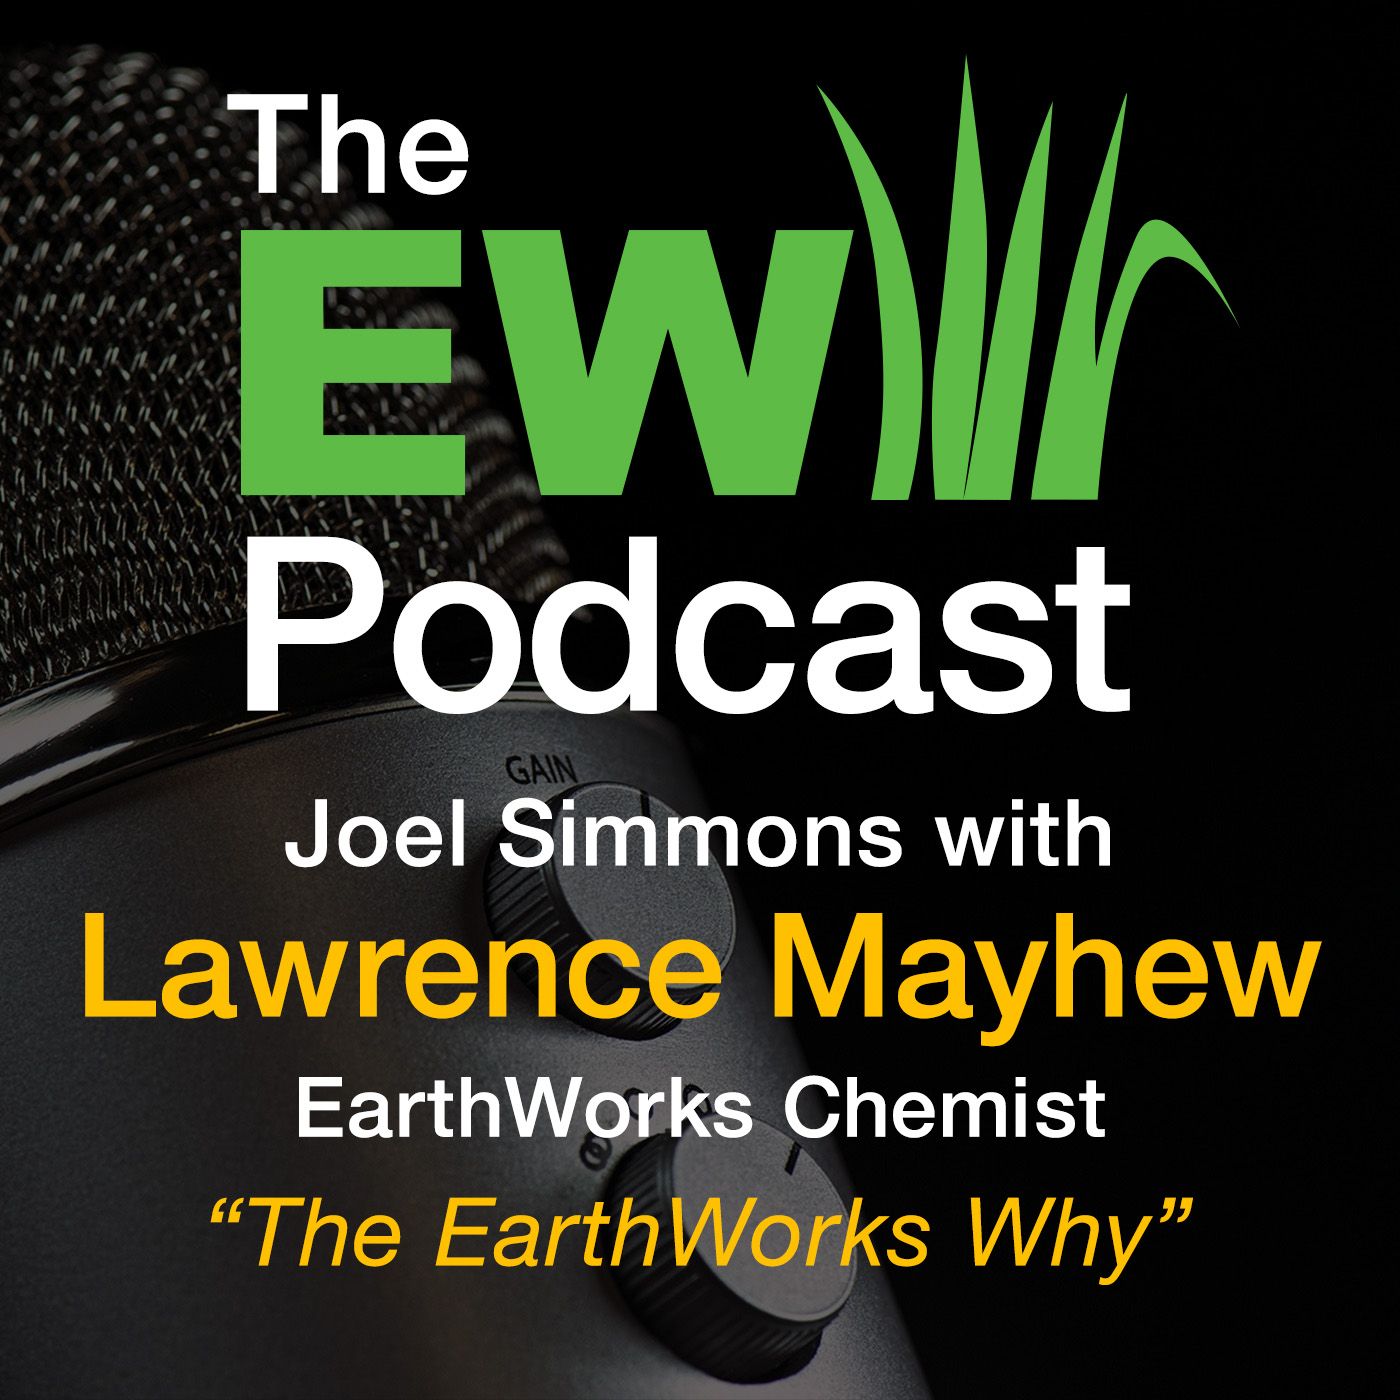 The EW Podcast - Joel Simmons with Lawrence Mayhew - The EarthWorks Why